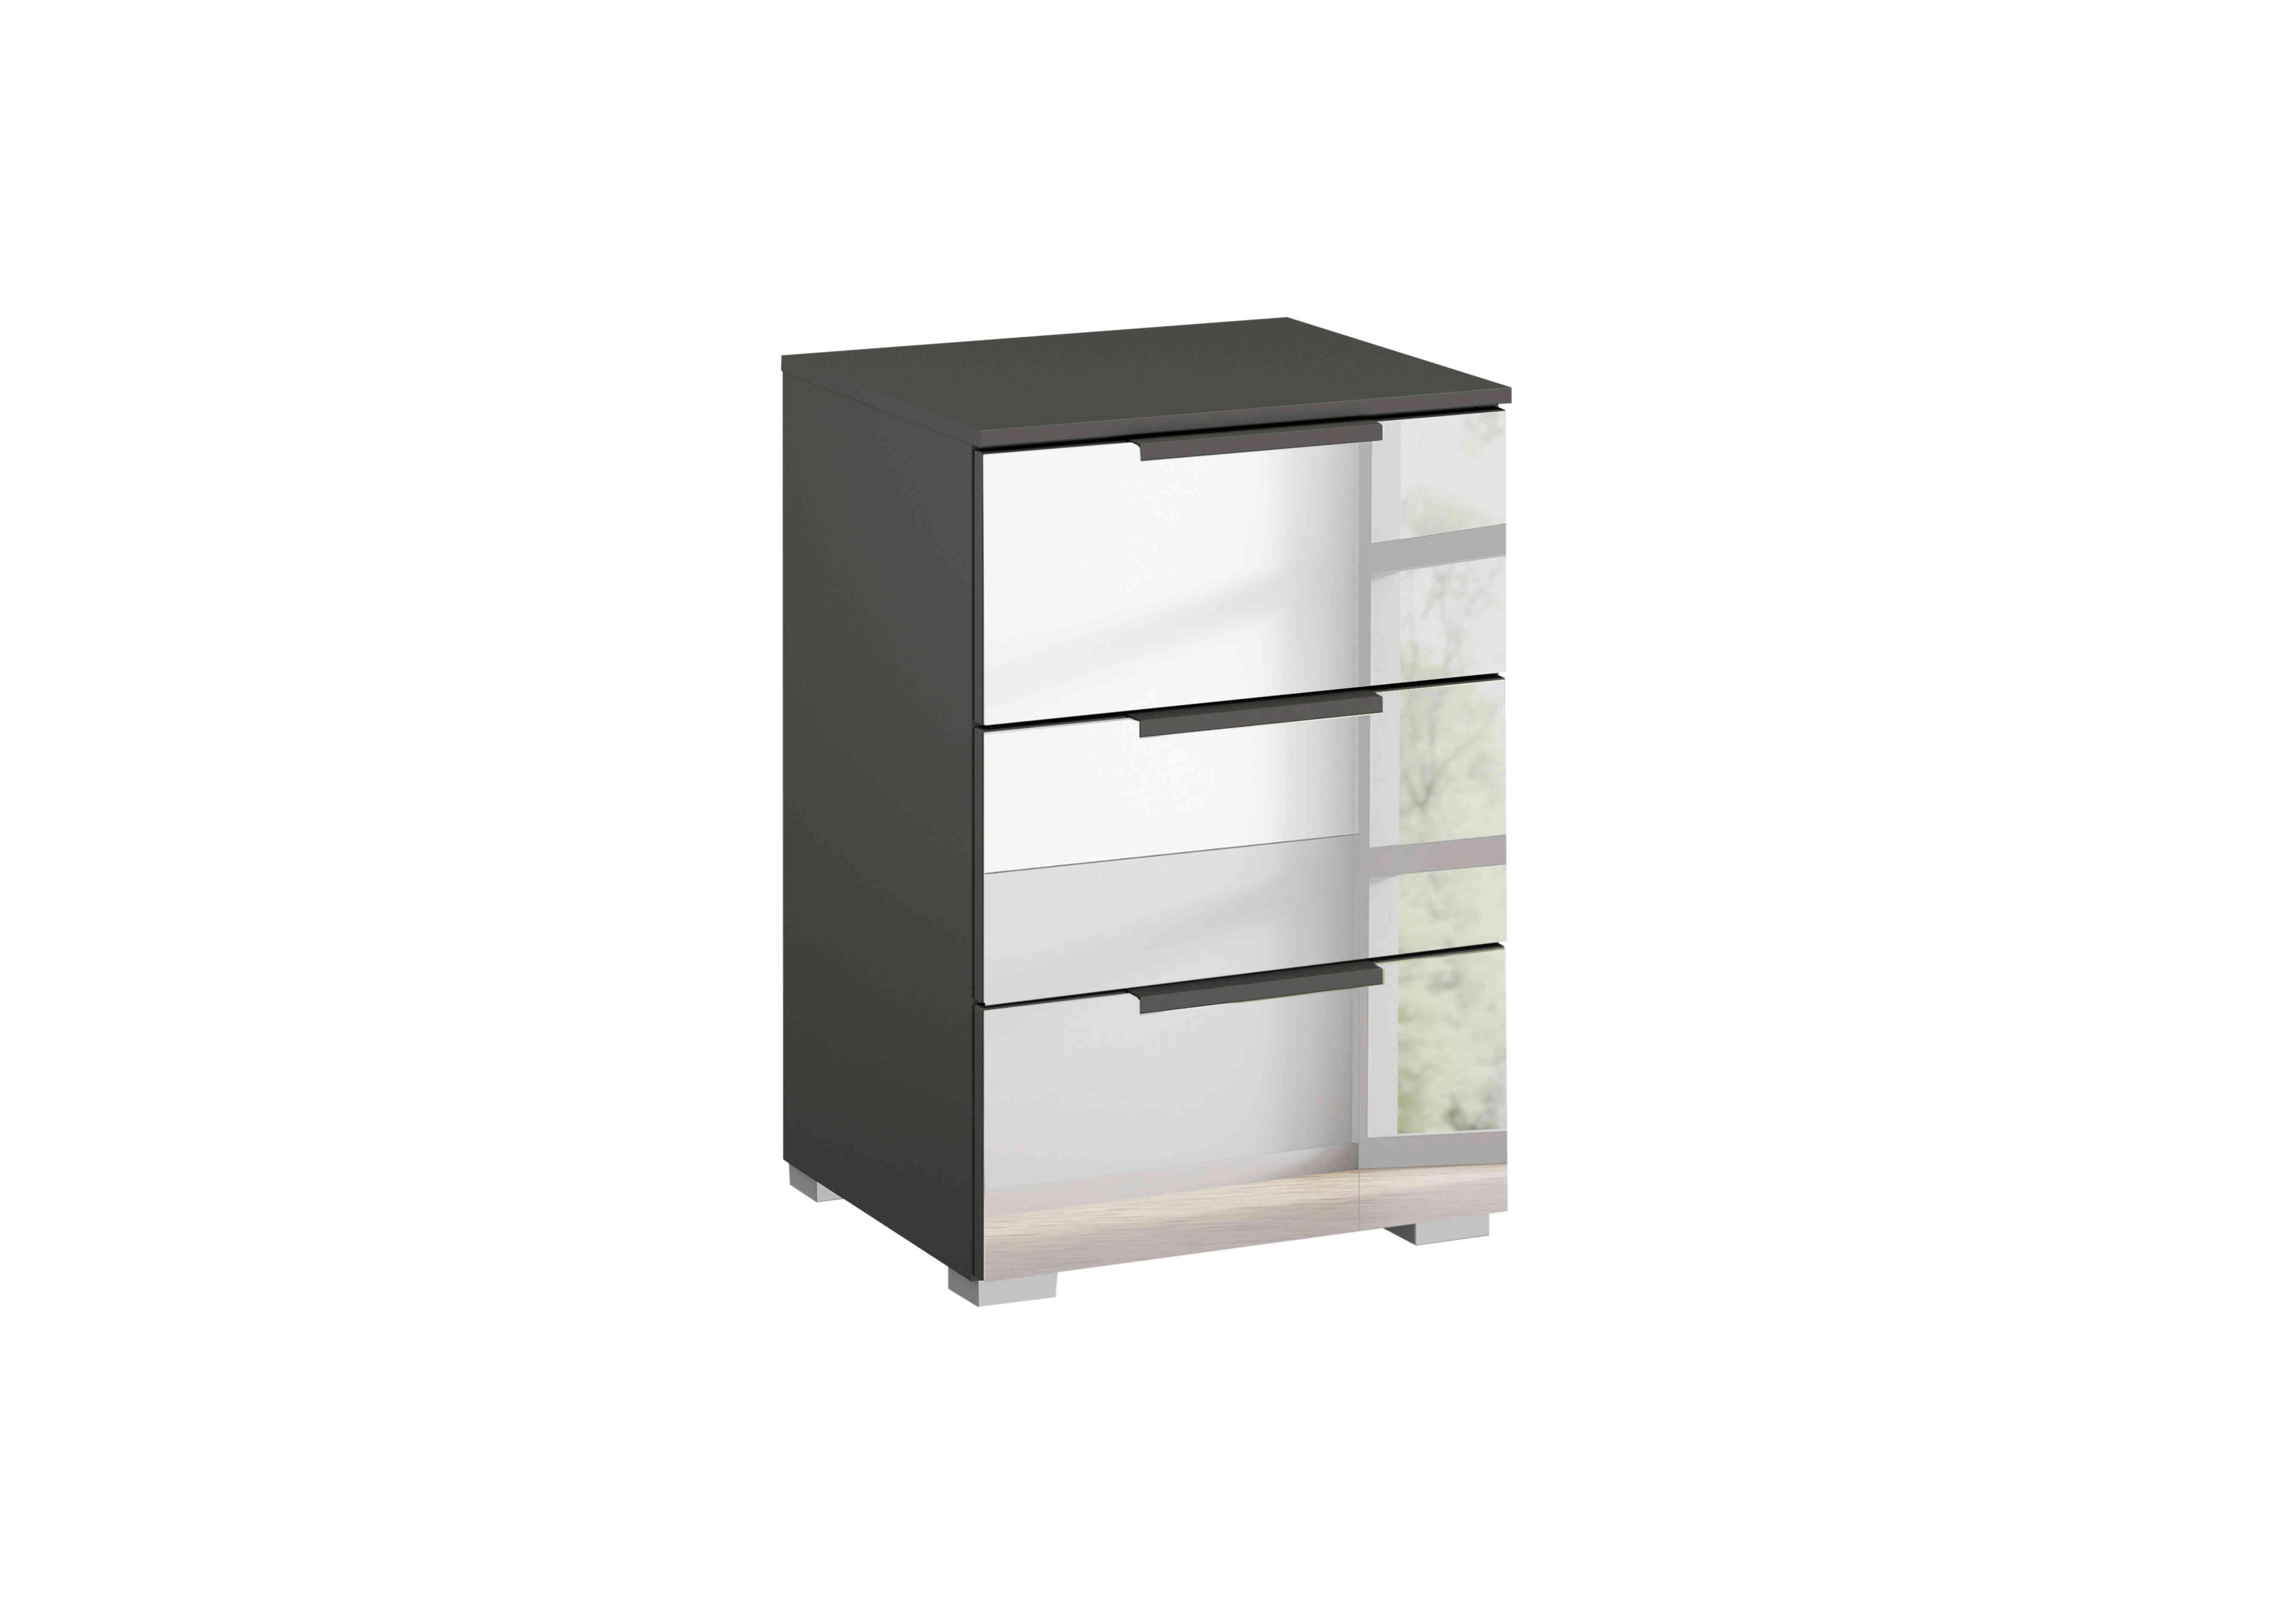 Rio 40cm 3 Drawer Bedside Cabinet in Graphite Carc/Mirror Fro on Furniture Village